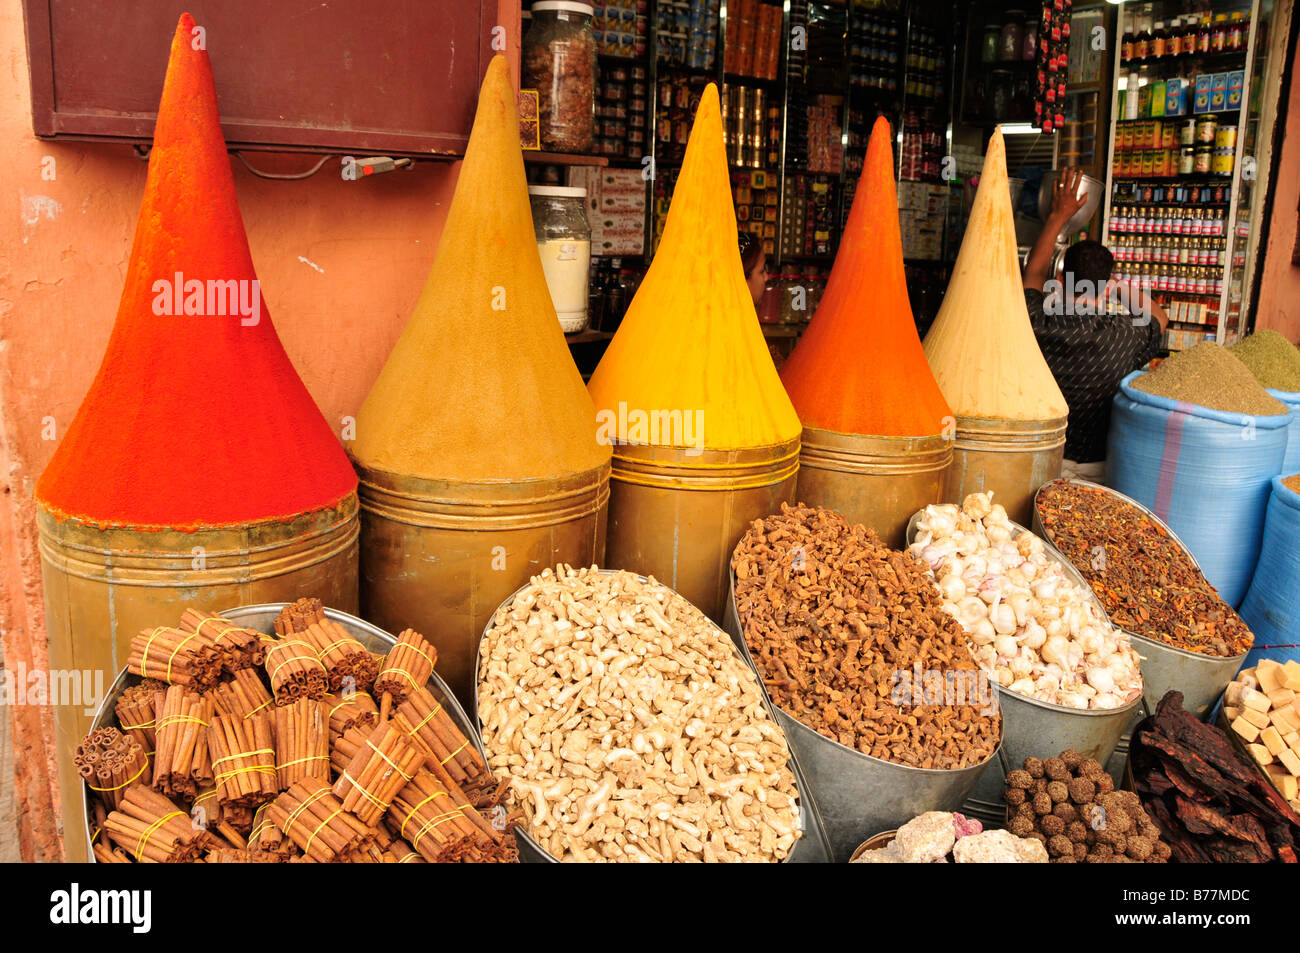 Piles of spices in the Souk, market, in the Medina, historic city centre of Marrakech, Morocco, Africa Stock Photo